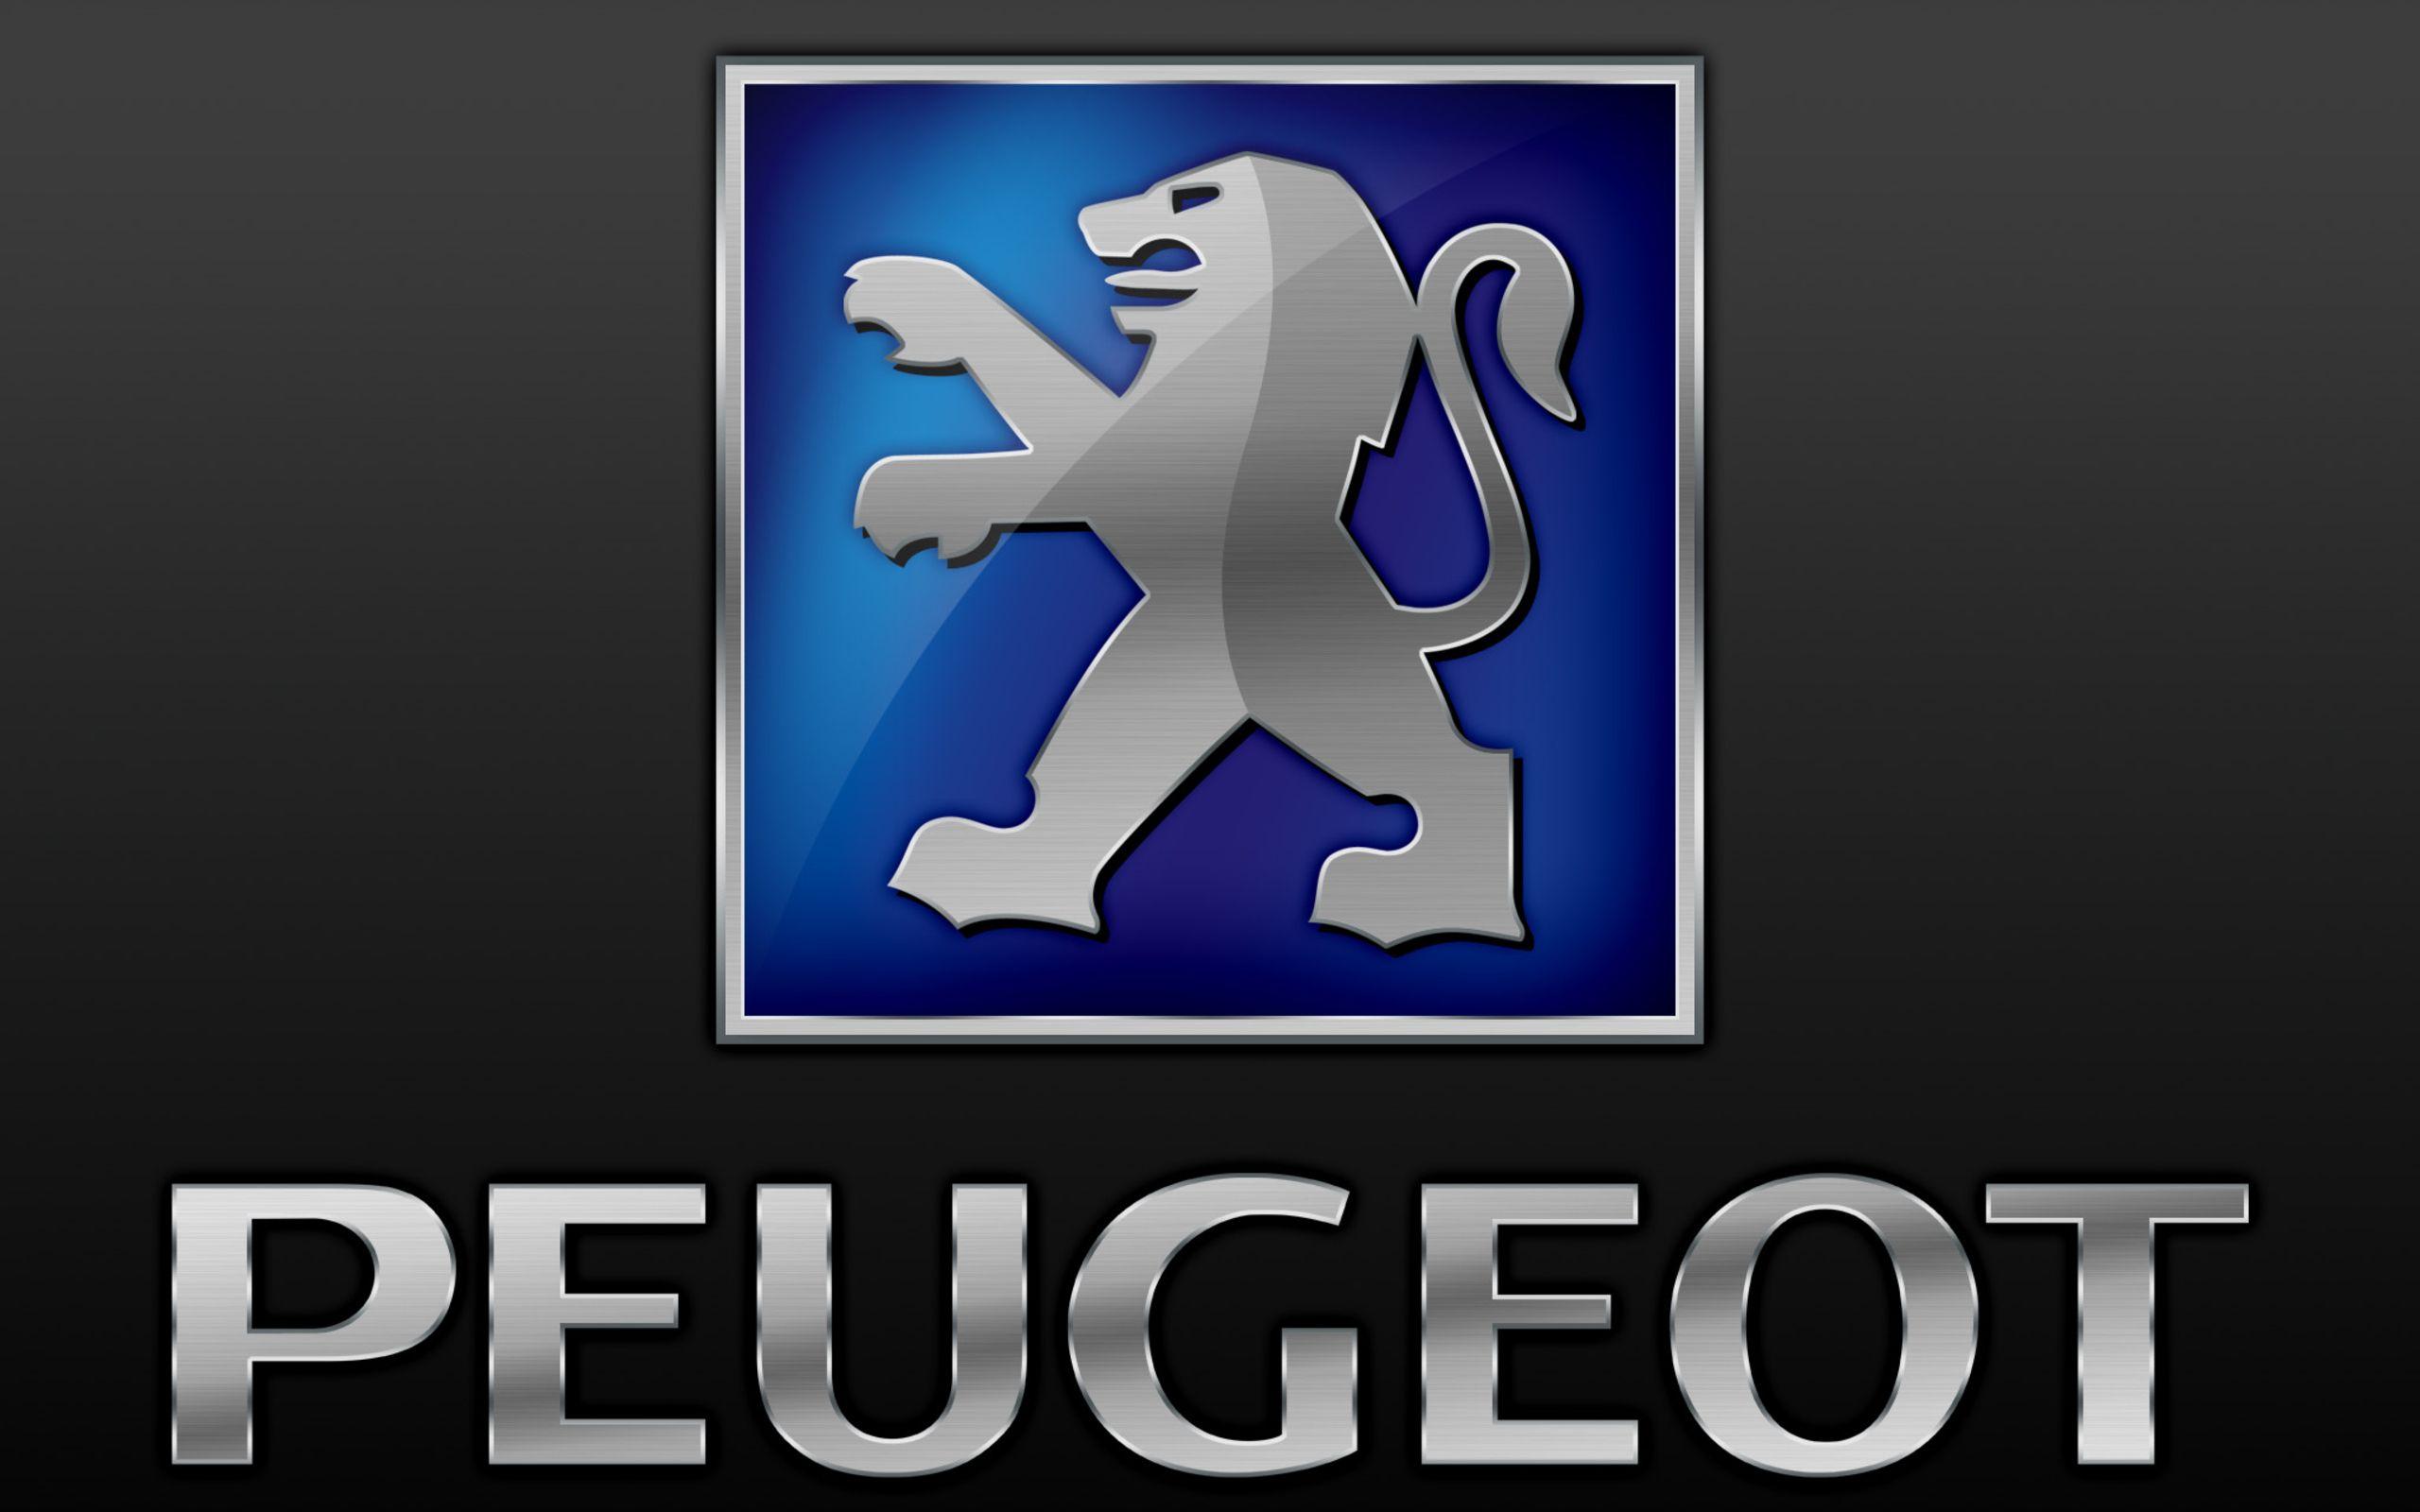 Peugeot Logo - Peugeot Logo, Peugeot Car Symbol Meaning and History | Car Brand ...